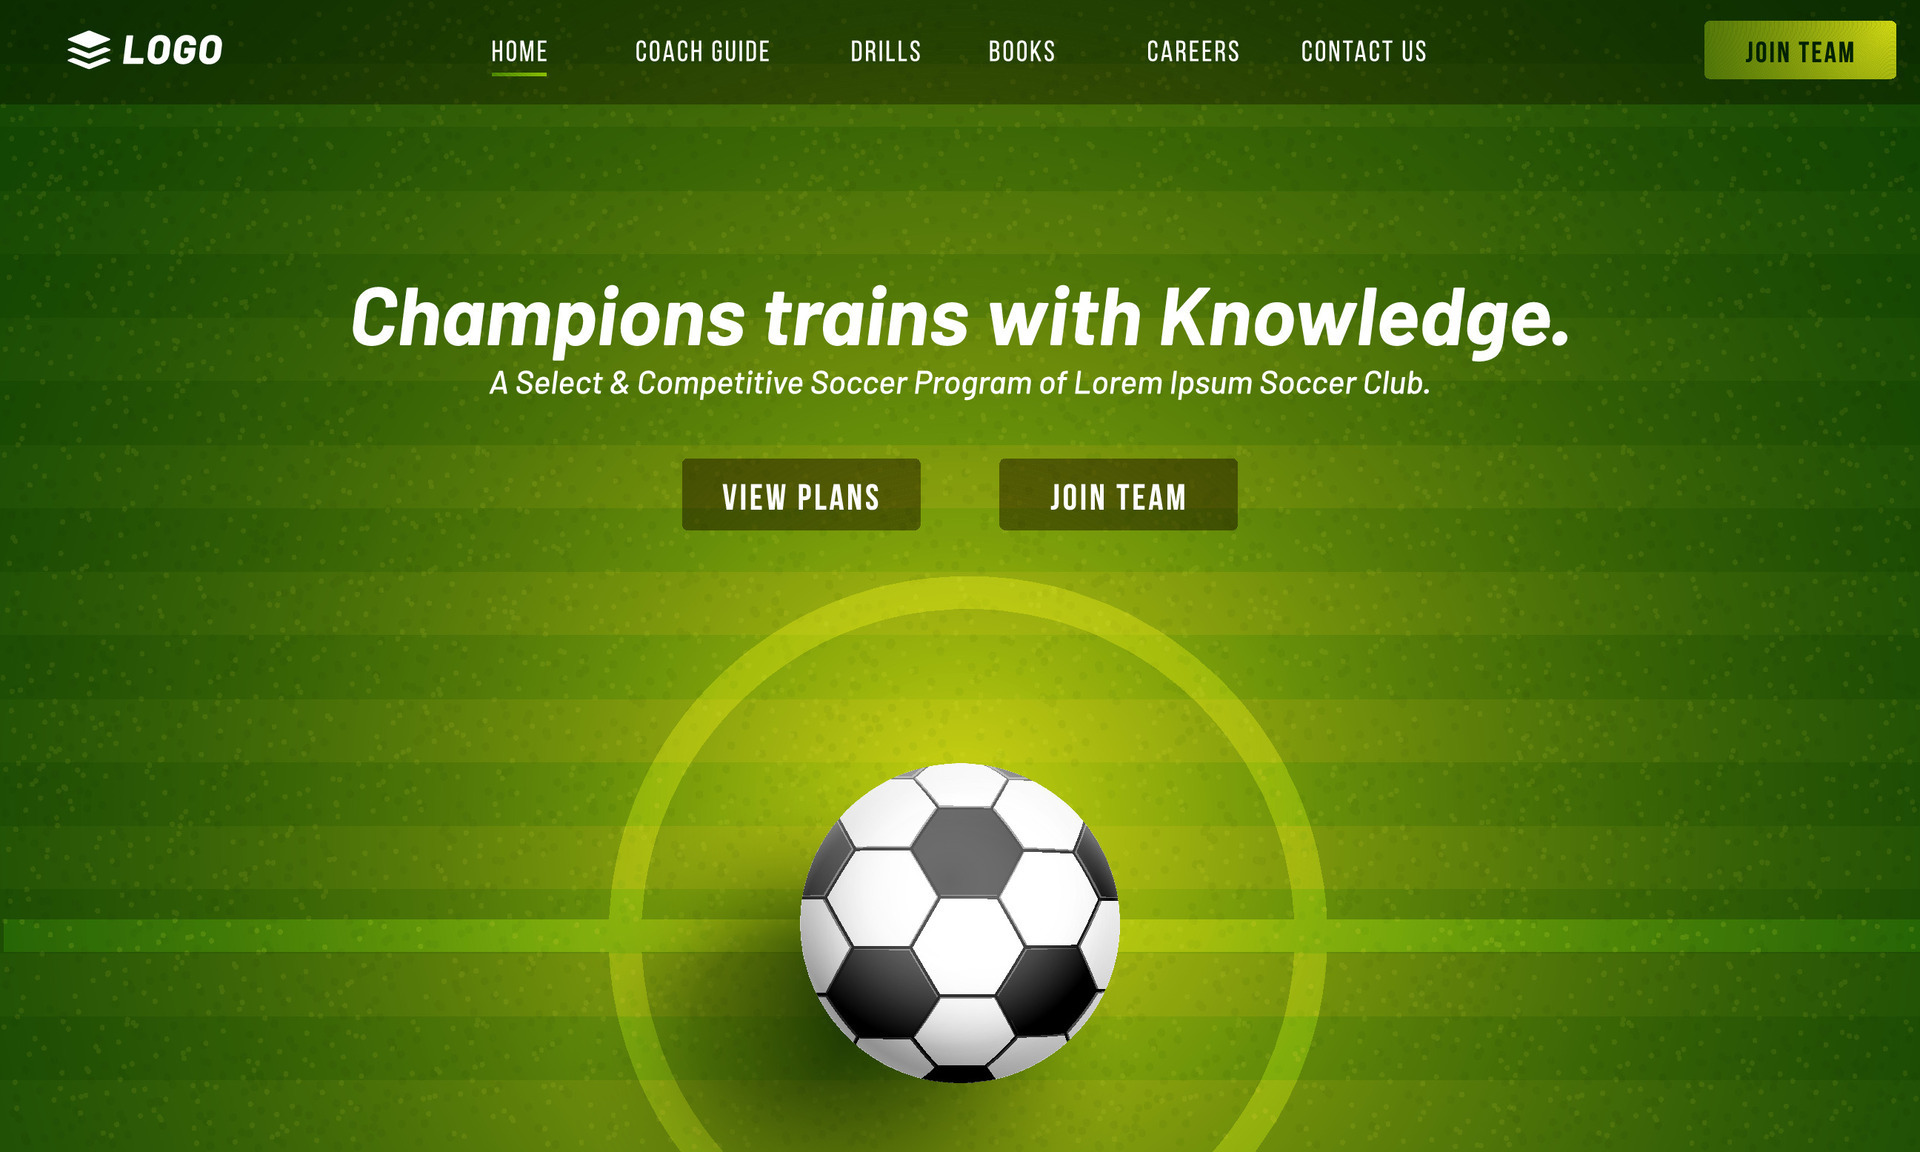 Soccer Champions Trains with Knowledge Game Website or Responsive App Design with Closeup Football on Center Field